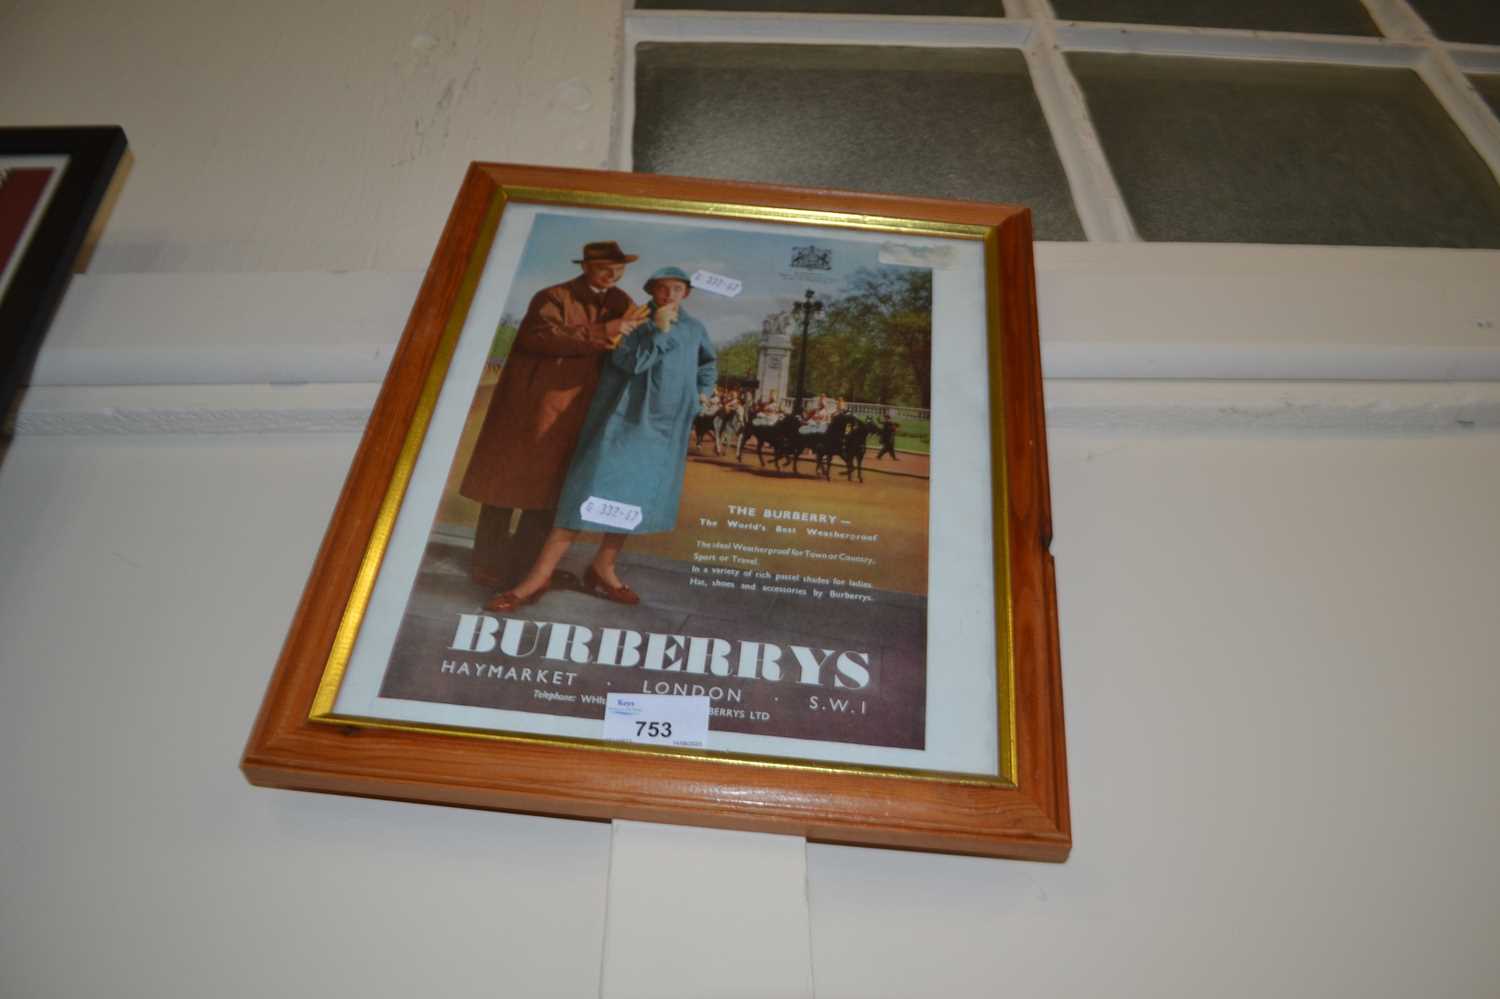 Burberry reproduction advertising print in pine frame